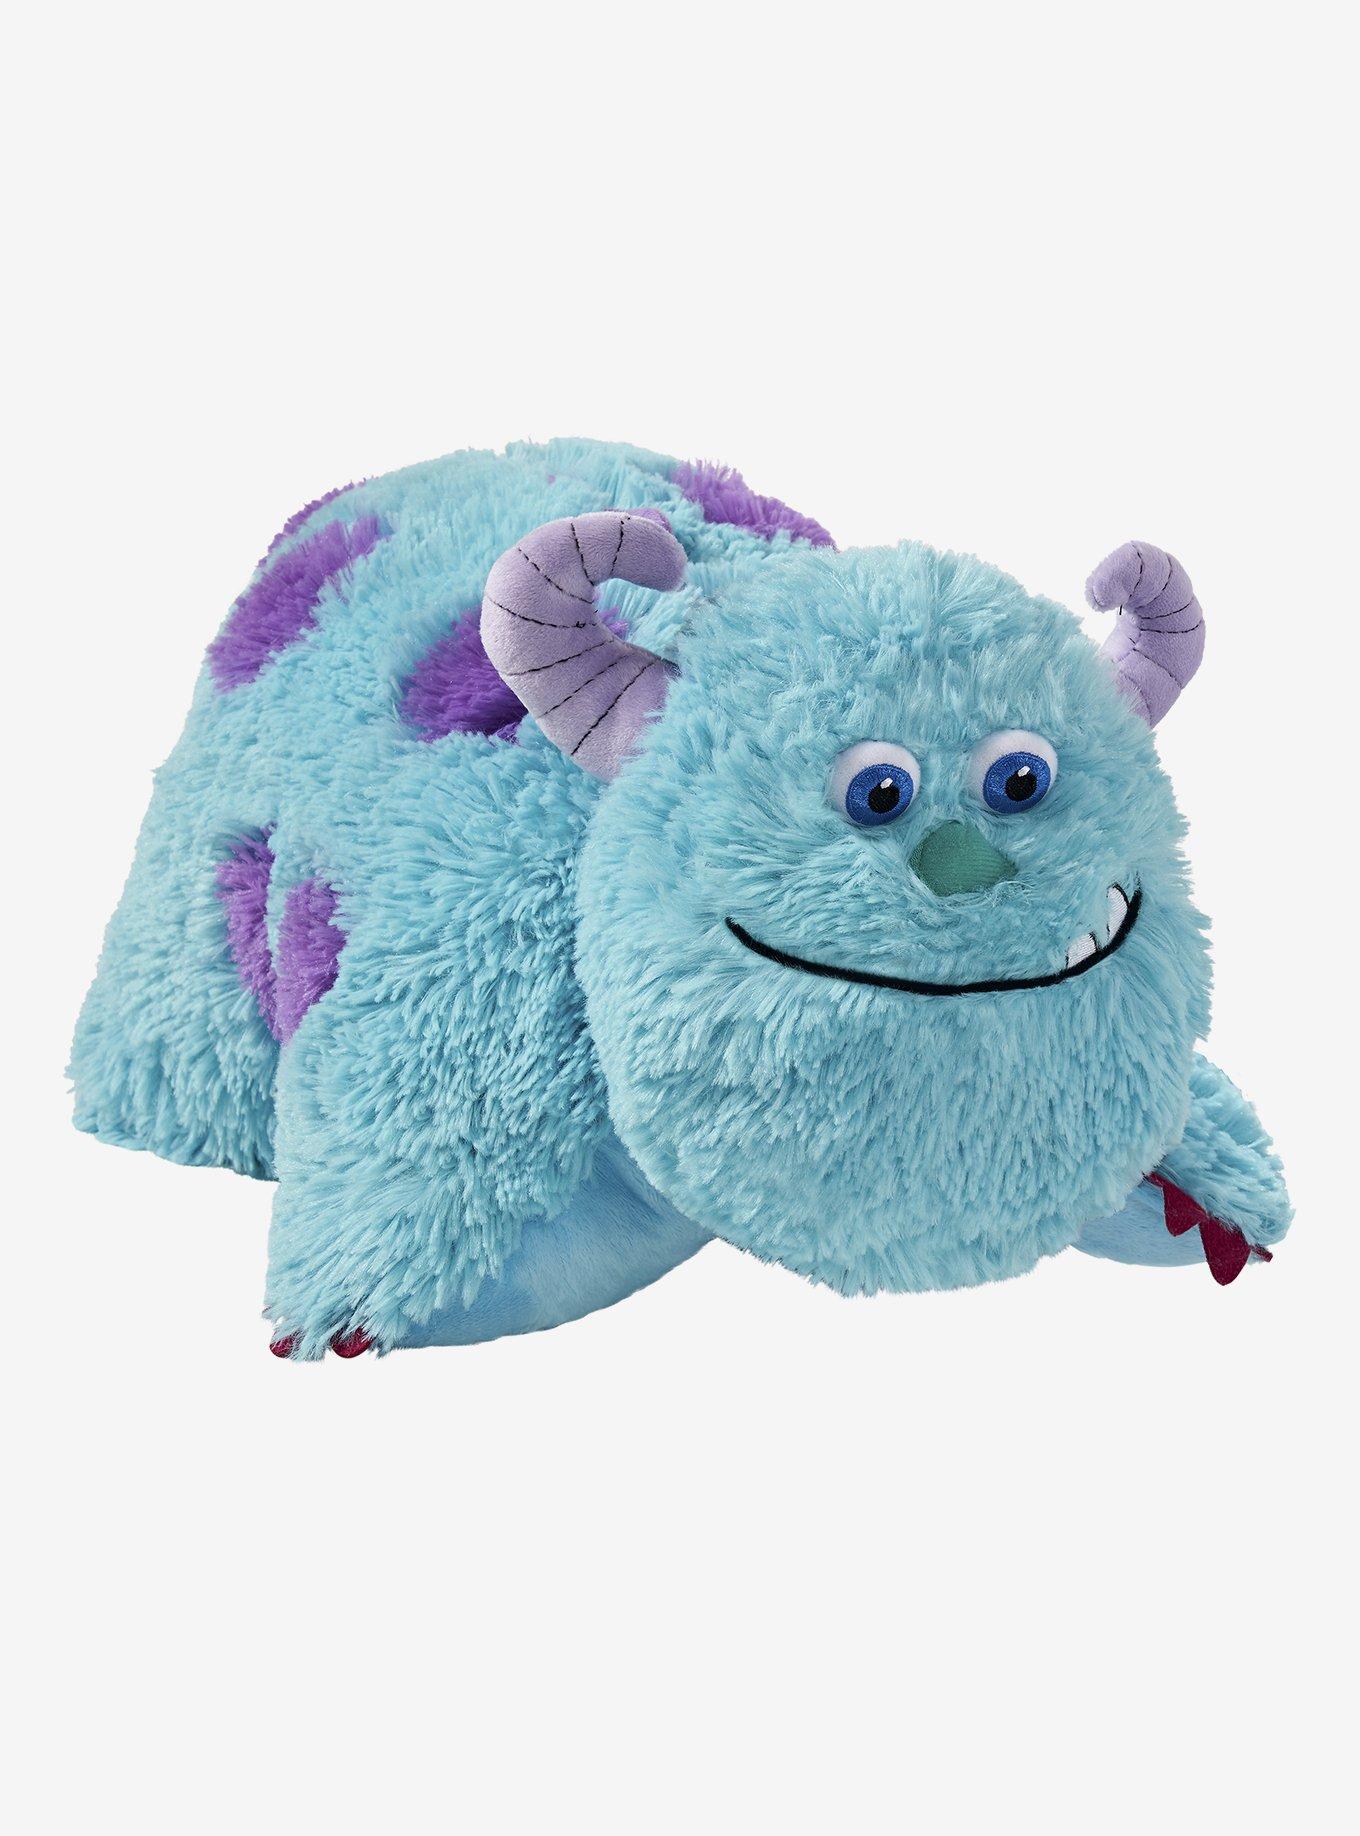 Disney Figural Ornament - Sulley with Backpack - Monsters University